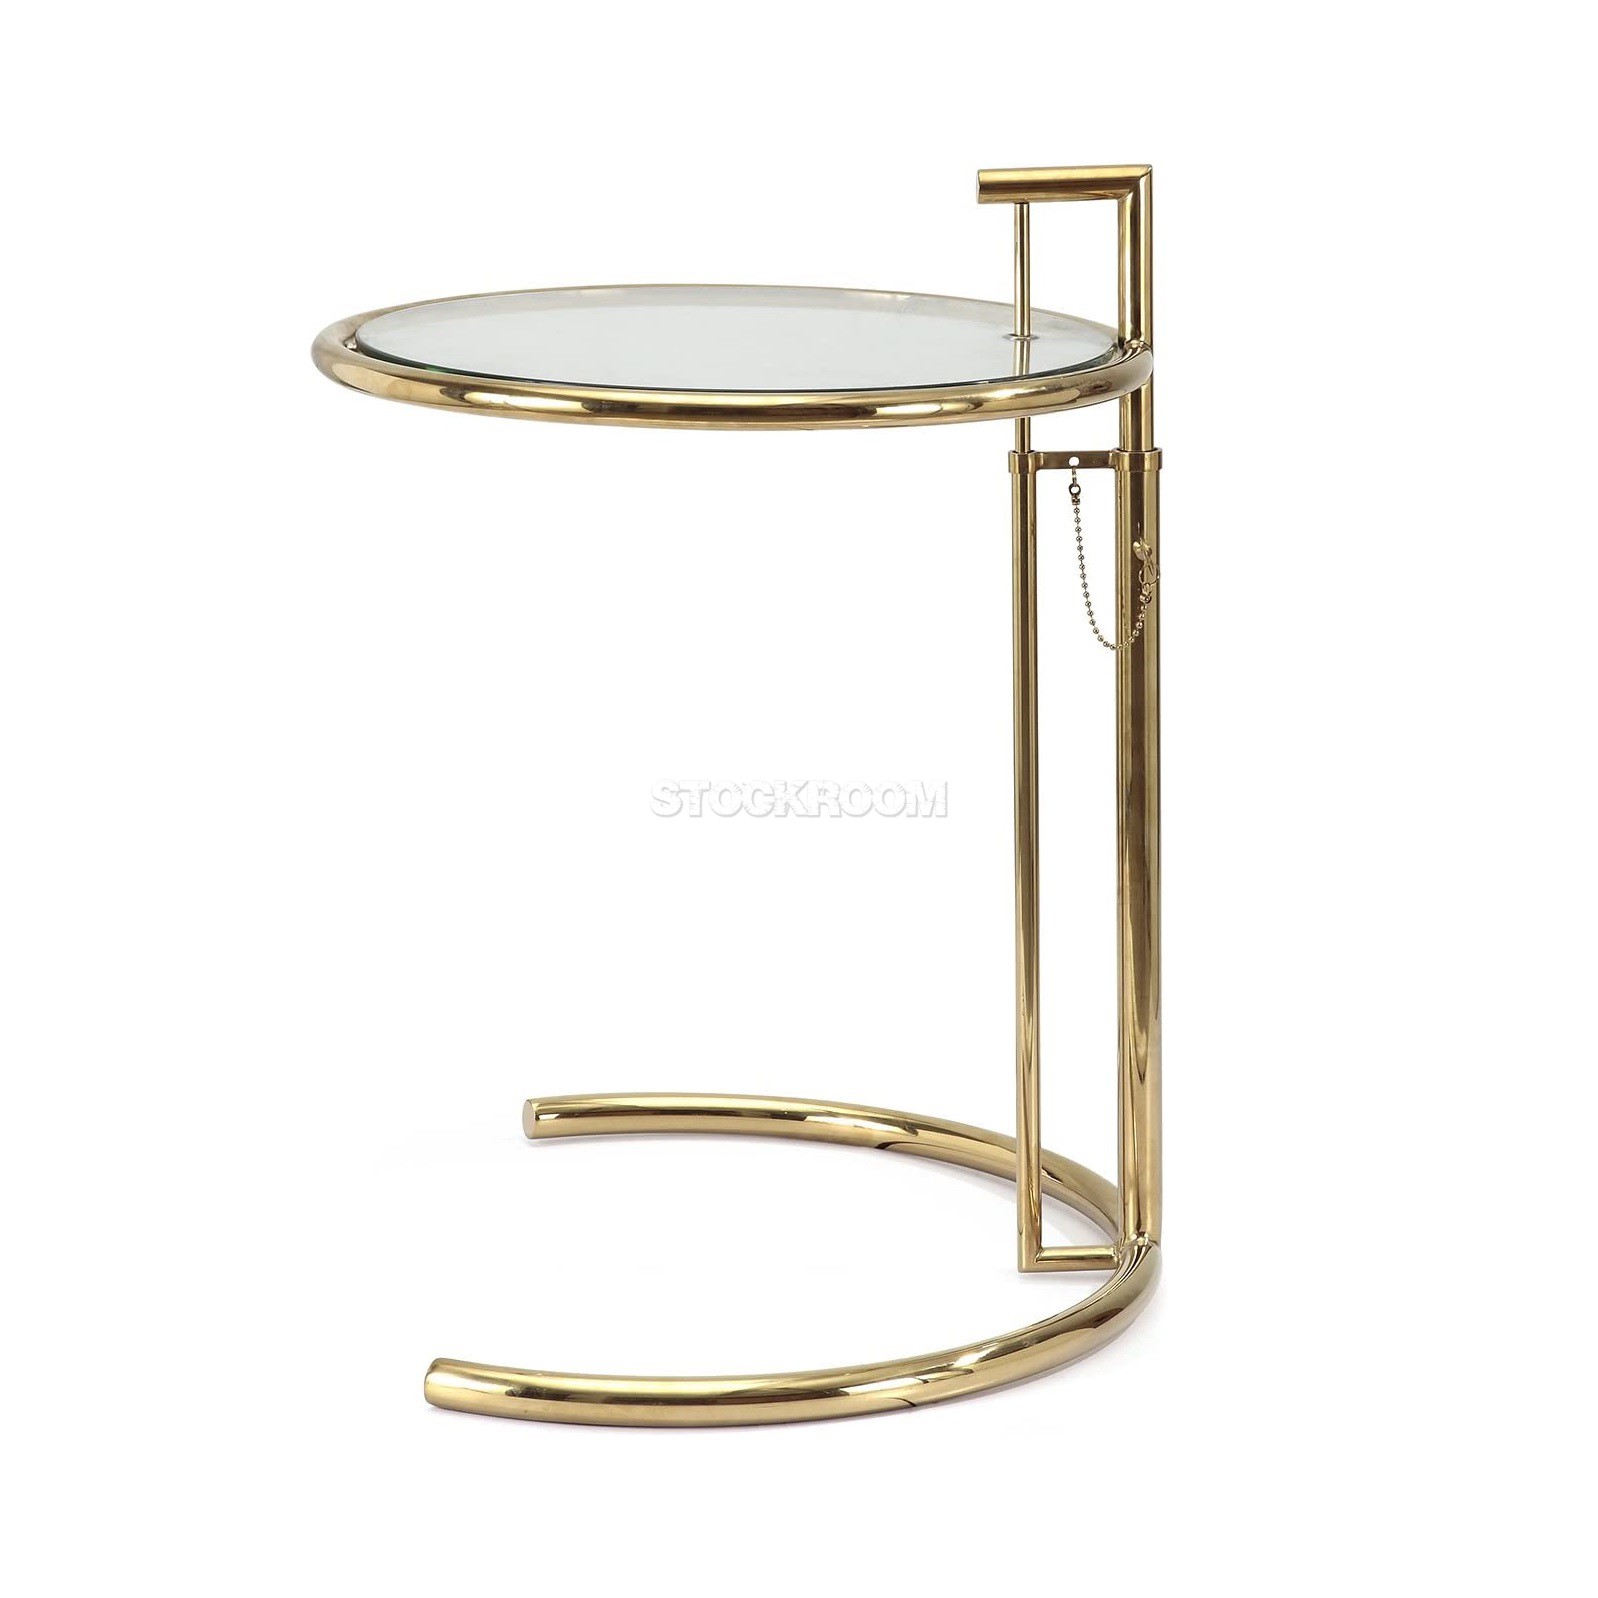 Eileen Gray Style Side Table - Gold